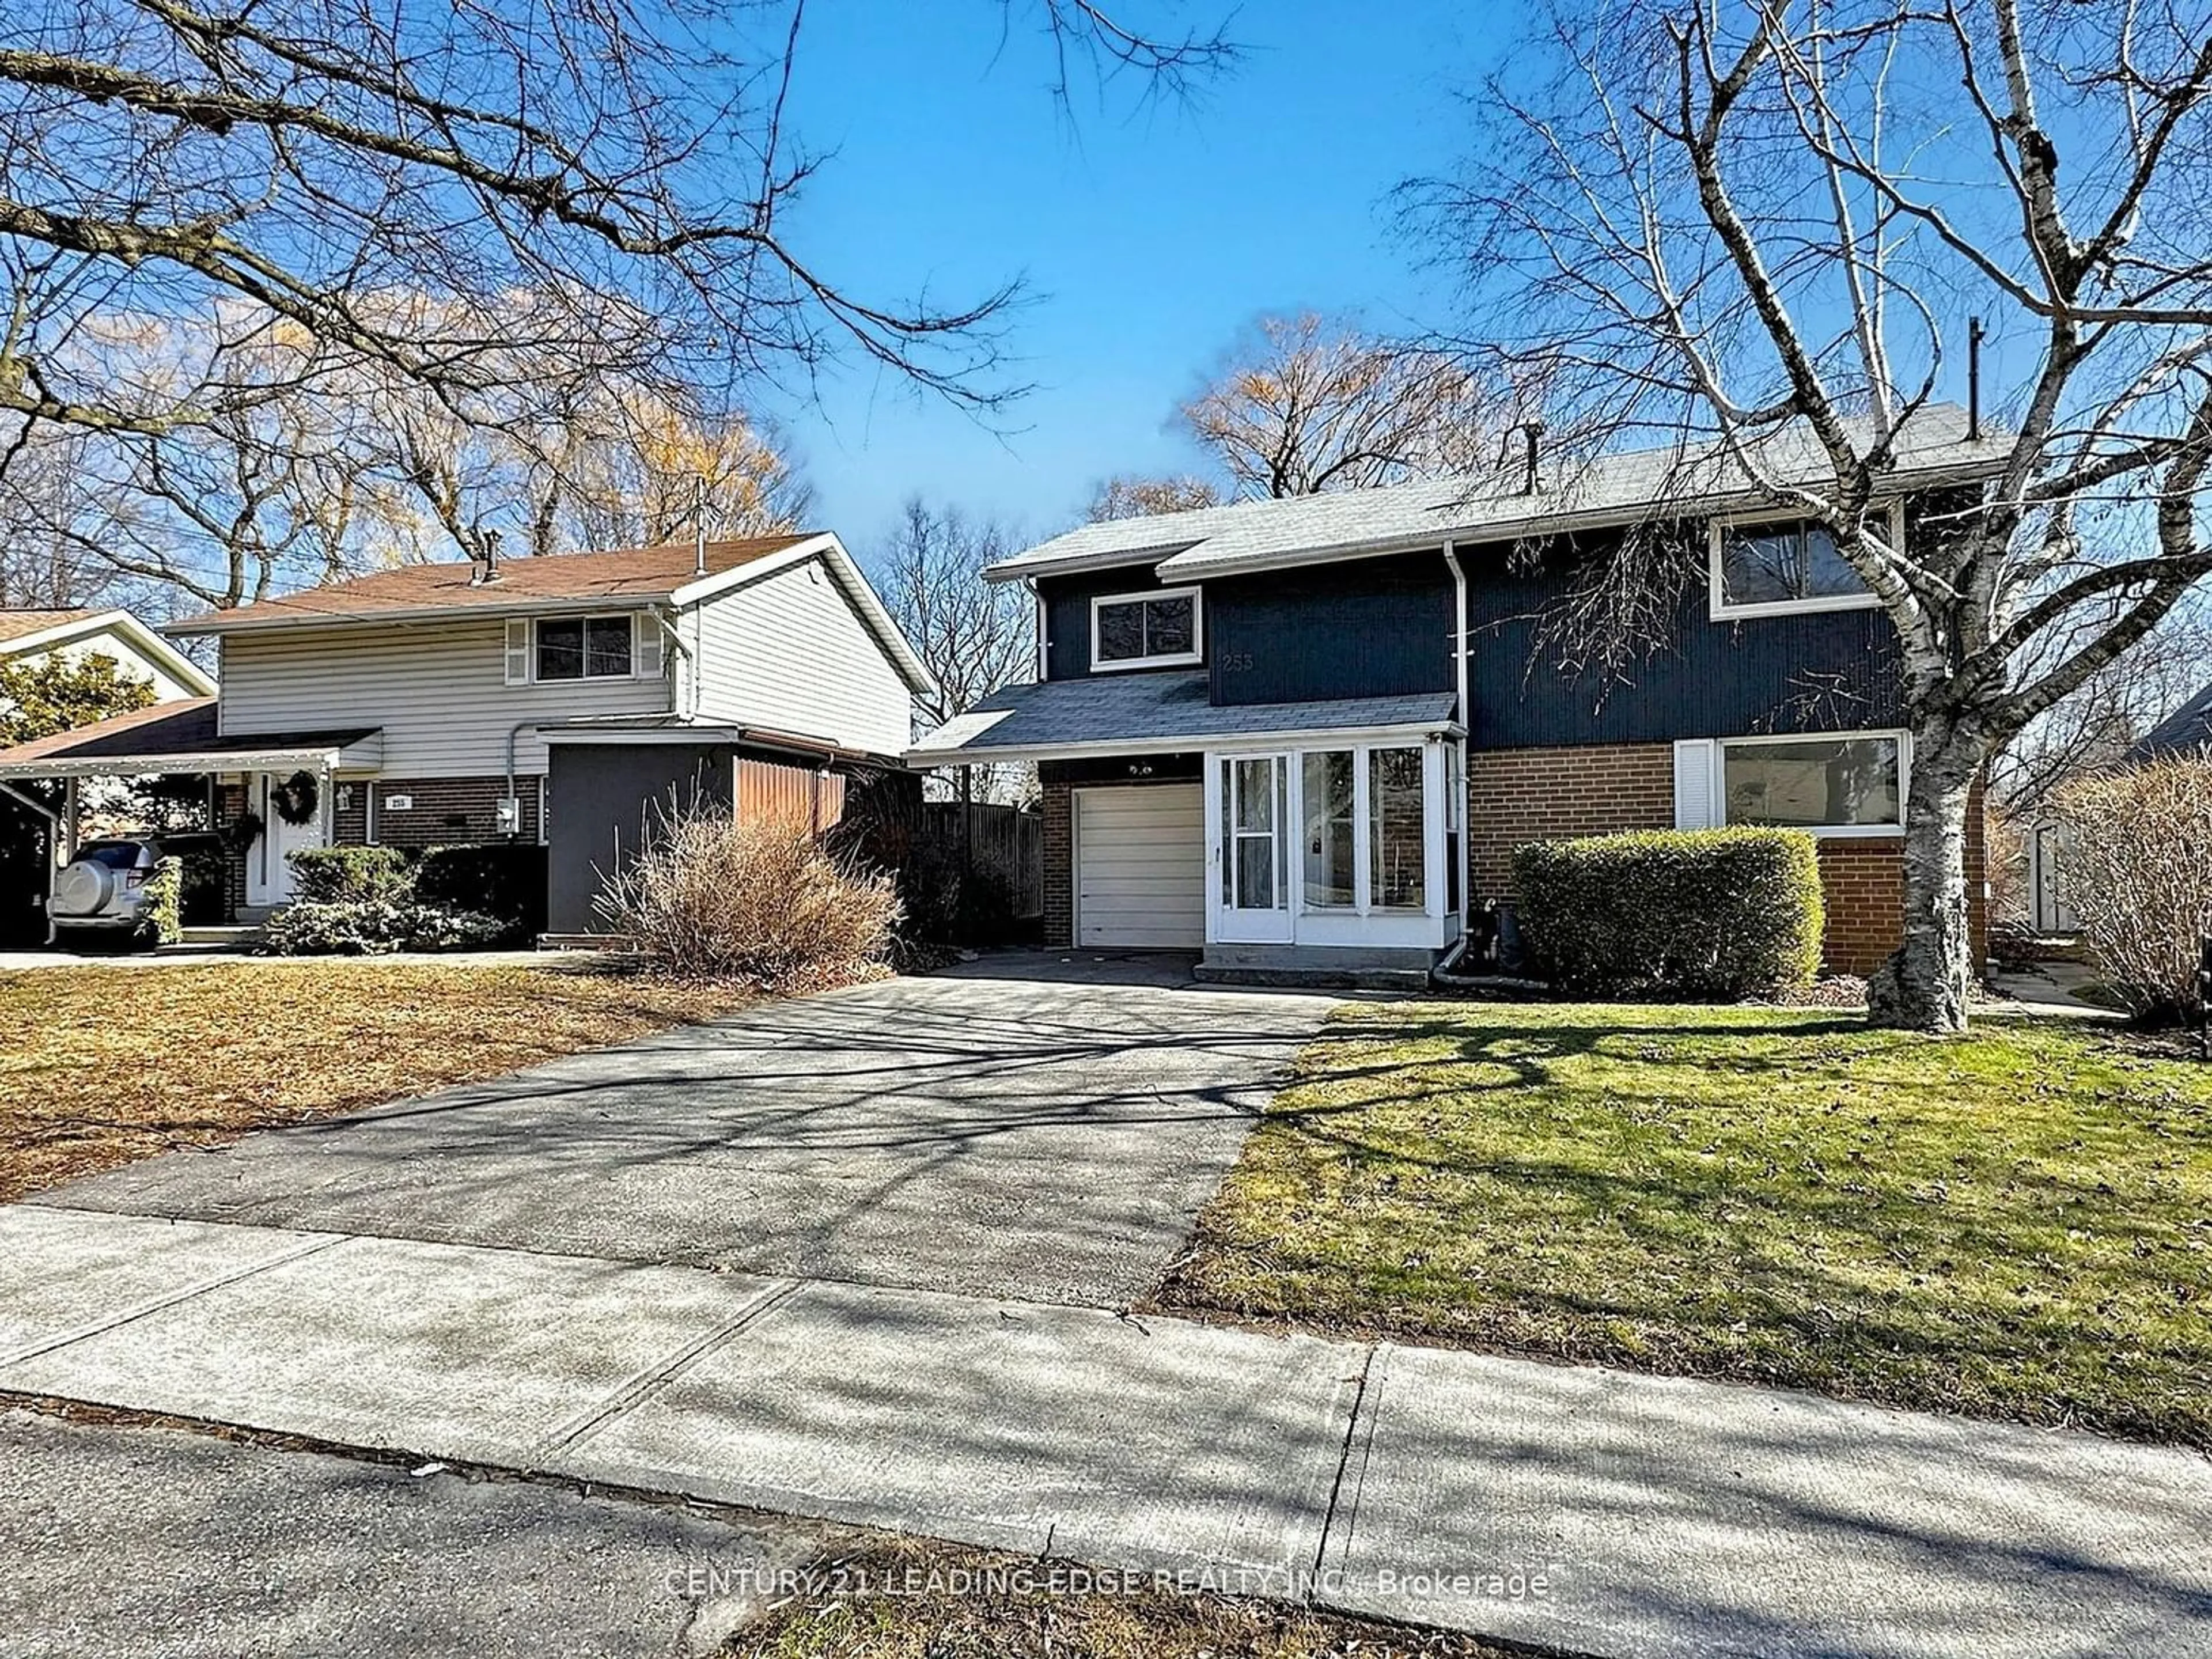 Frontside or backside of a home for 253 Birkdale Rd, Toronto Ontario M1P 3S3